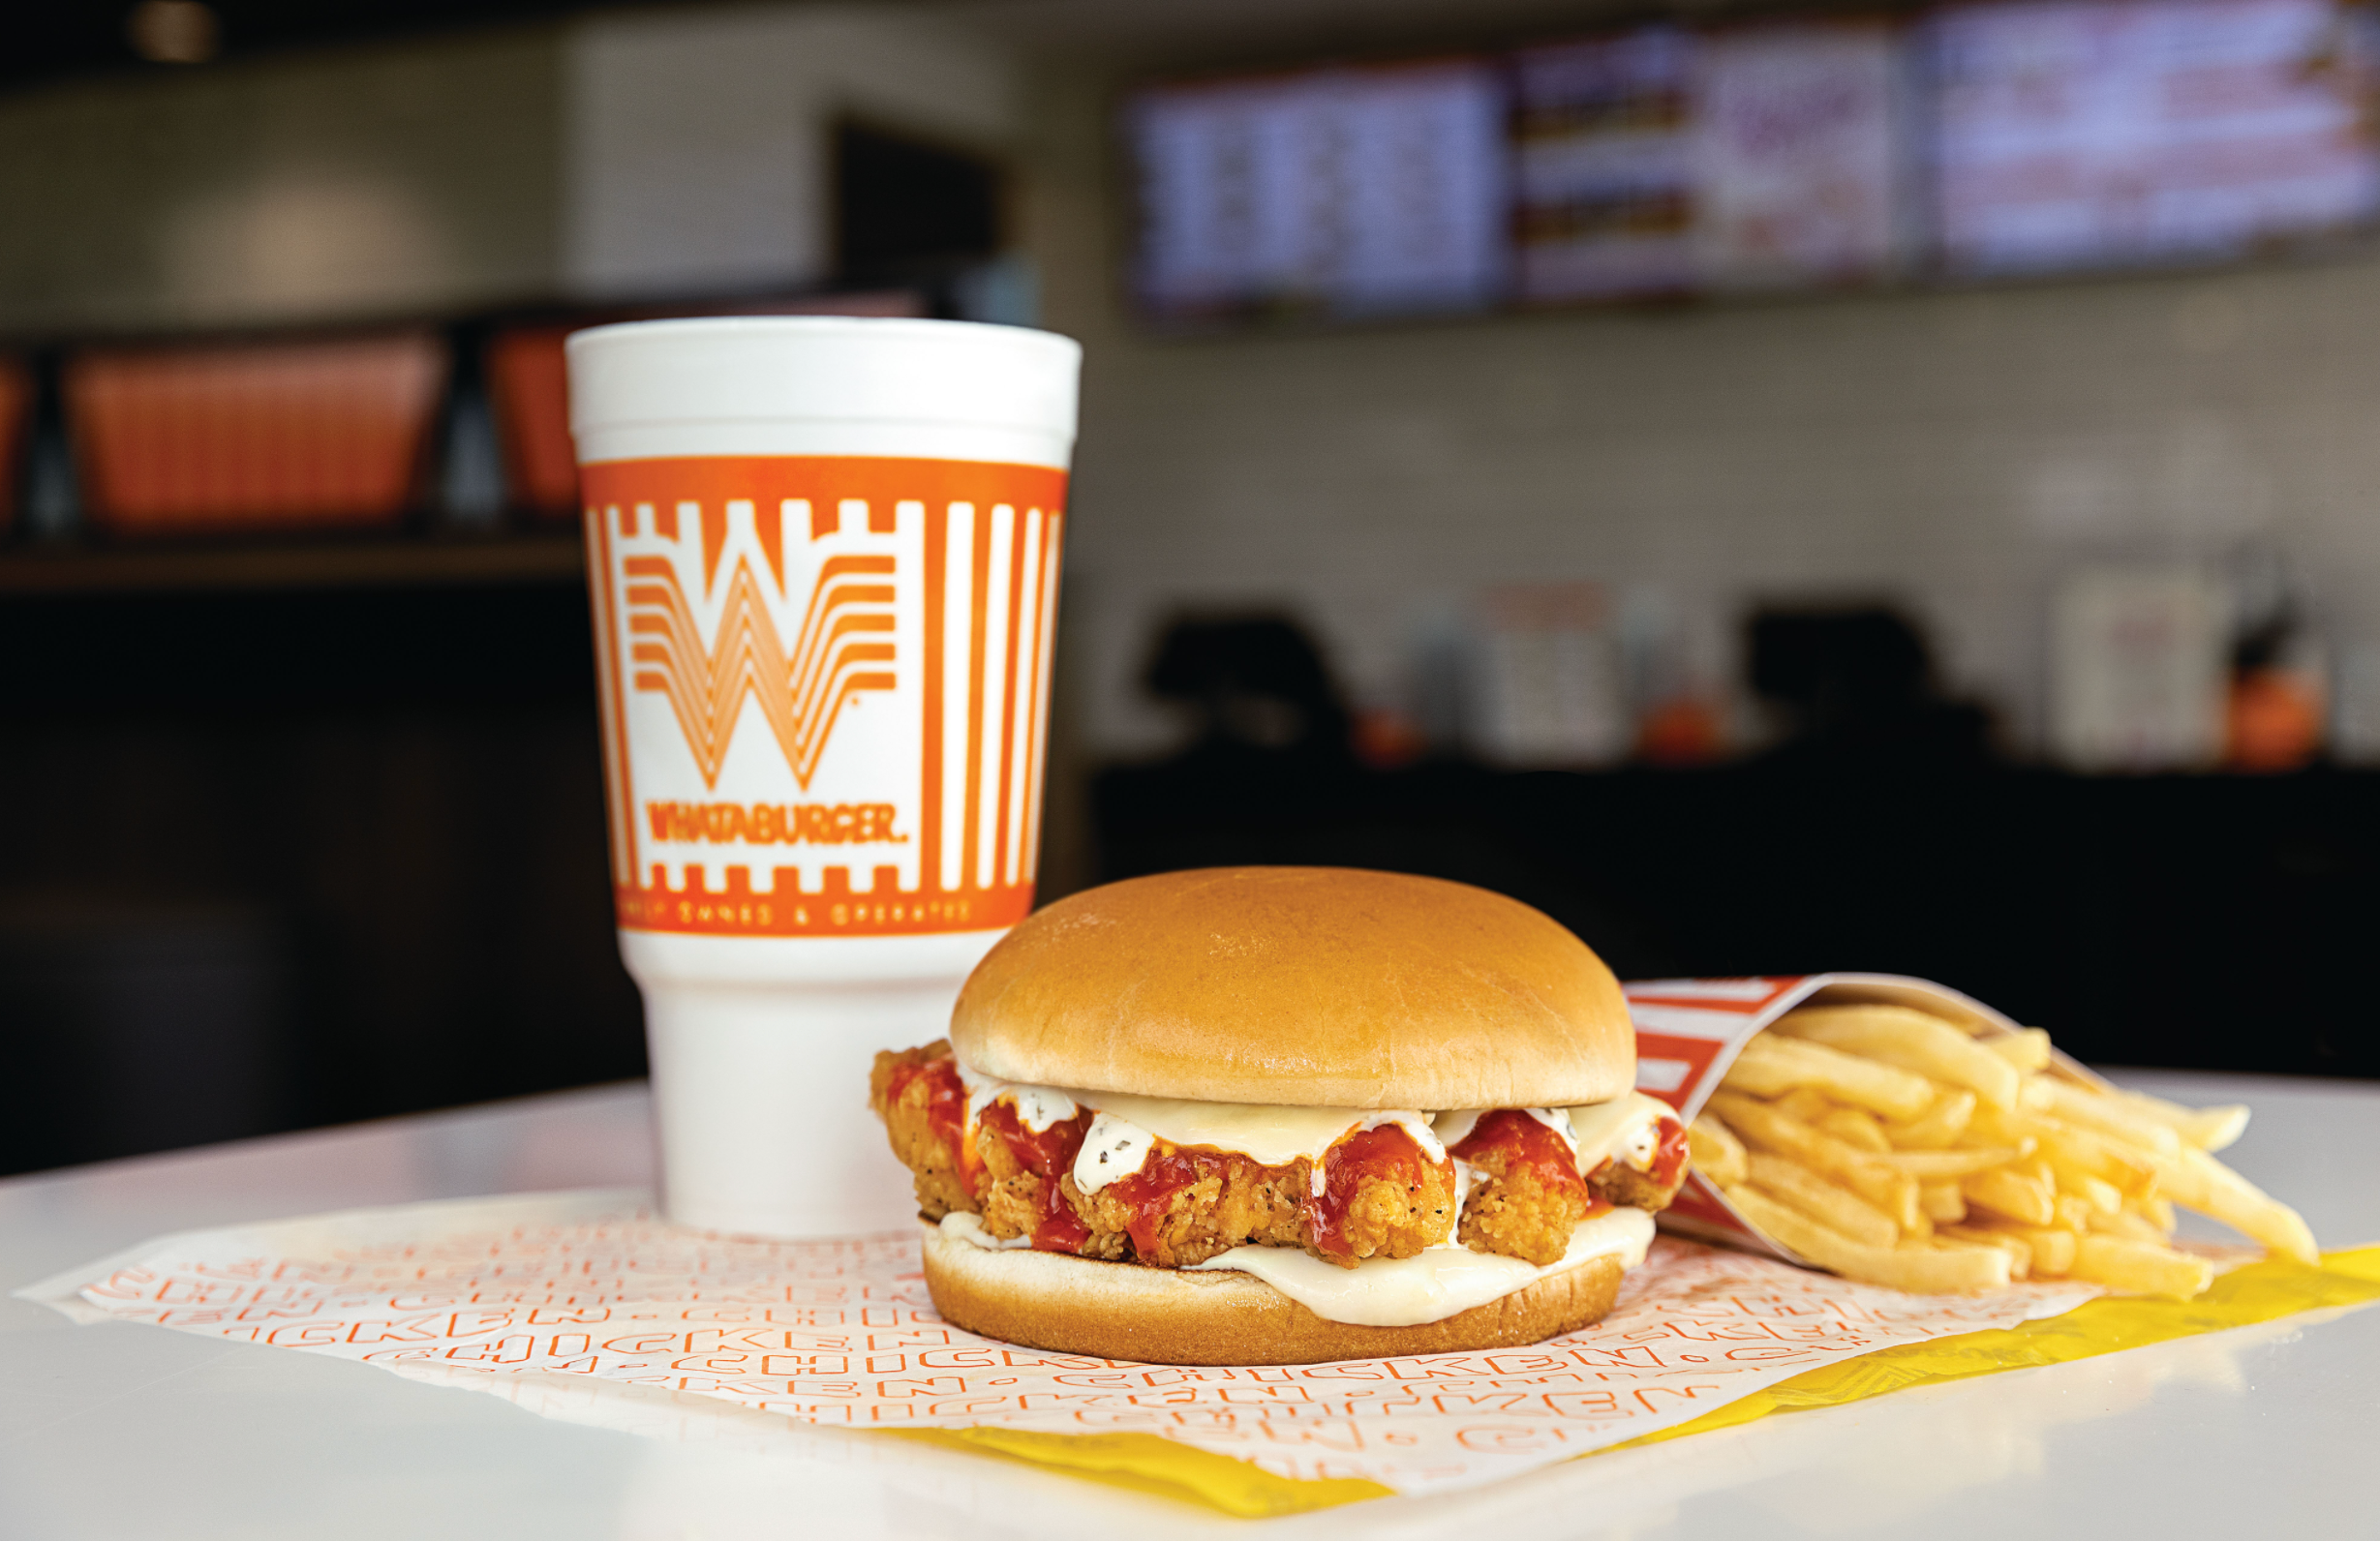 Whataburger releases new Spicy Ketchup flavor for a limited time